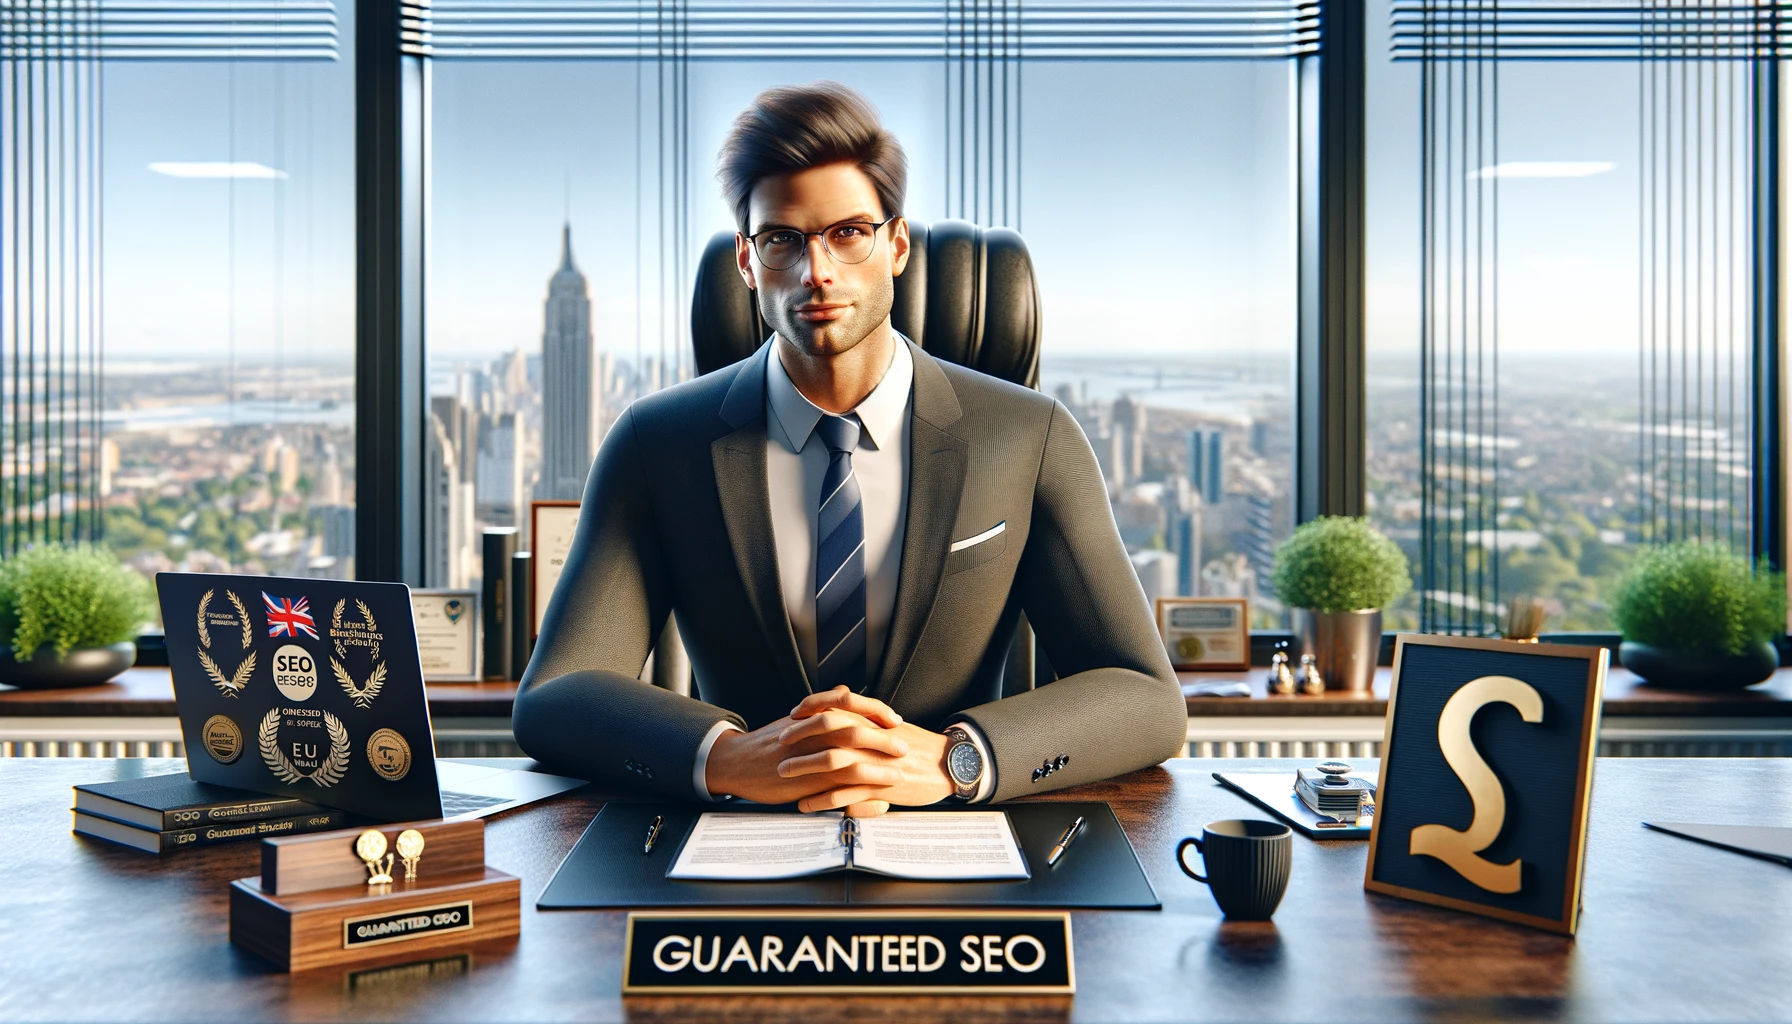 who is the ceo of guaranteed seo